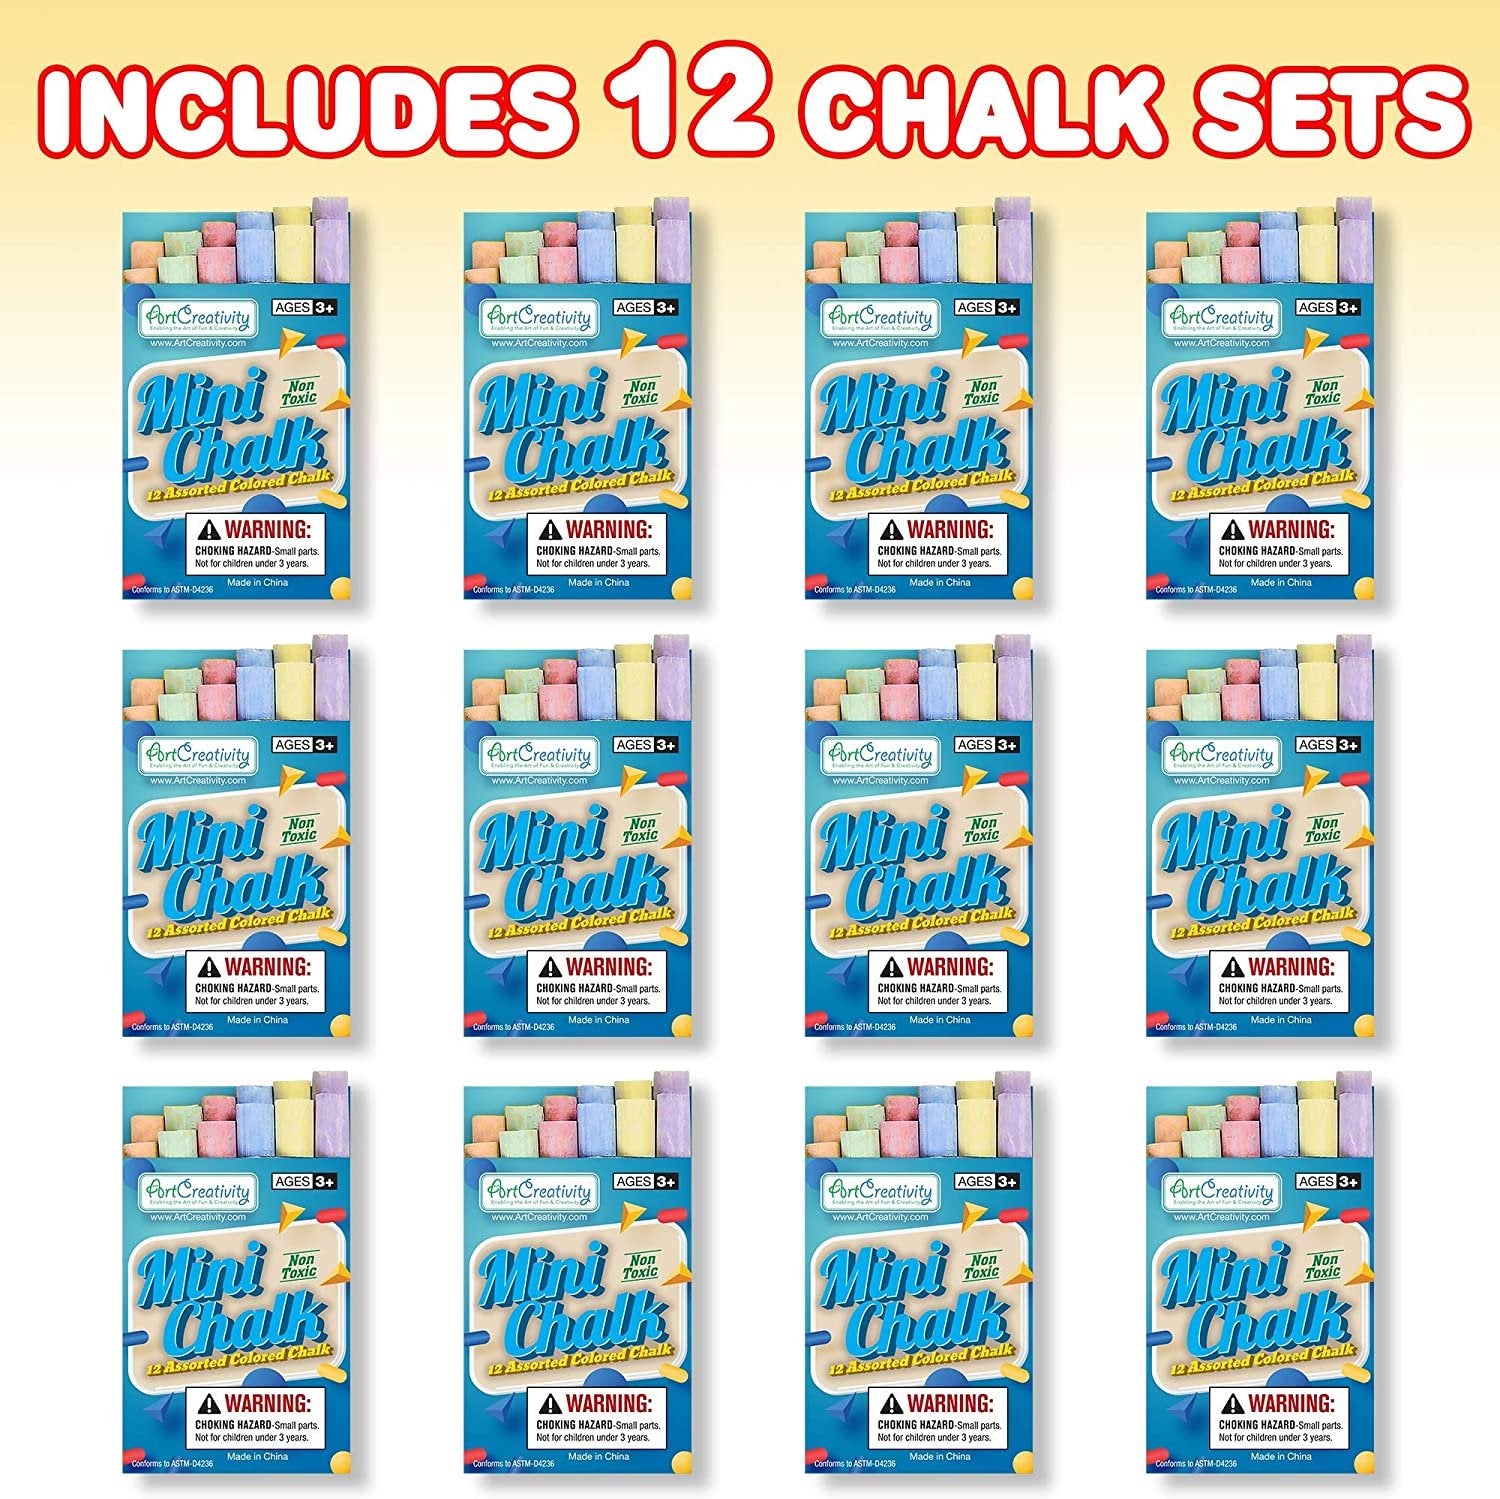 Mini Chalk Set for Kids - 12 Boxes - Each Box Has 12 Blackboard Chalk Sticks - Non-Toxic Art and Craft Supplies - Birthday Party Favors for Boys and Girls - Fun Goody Bag Fillers